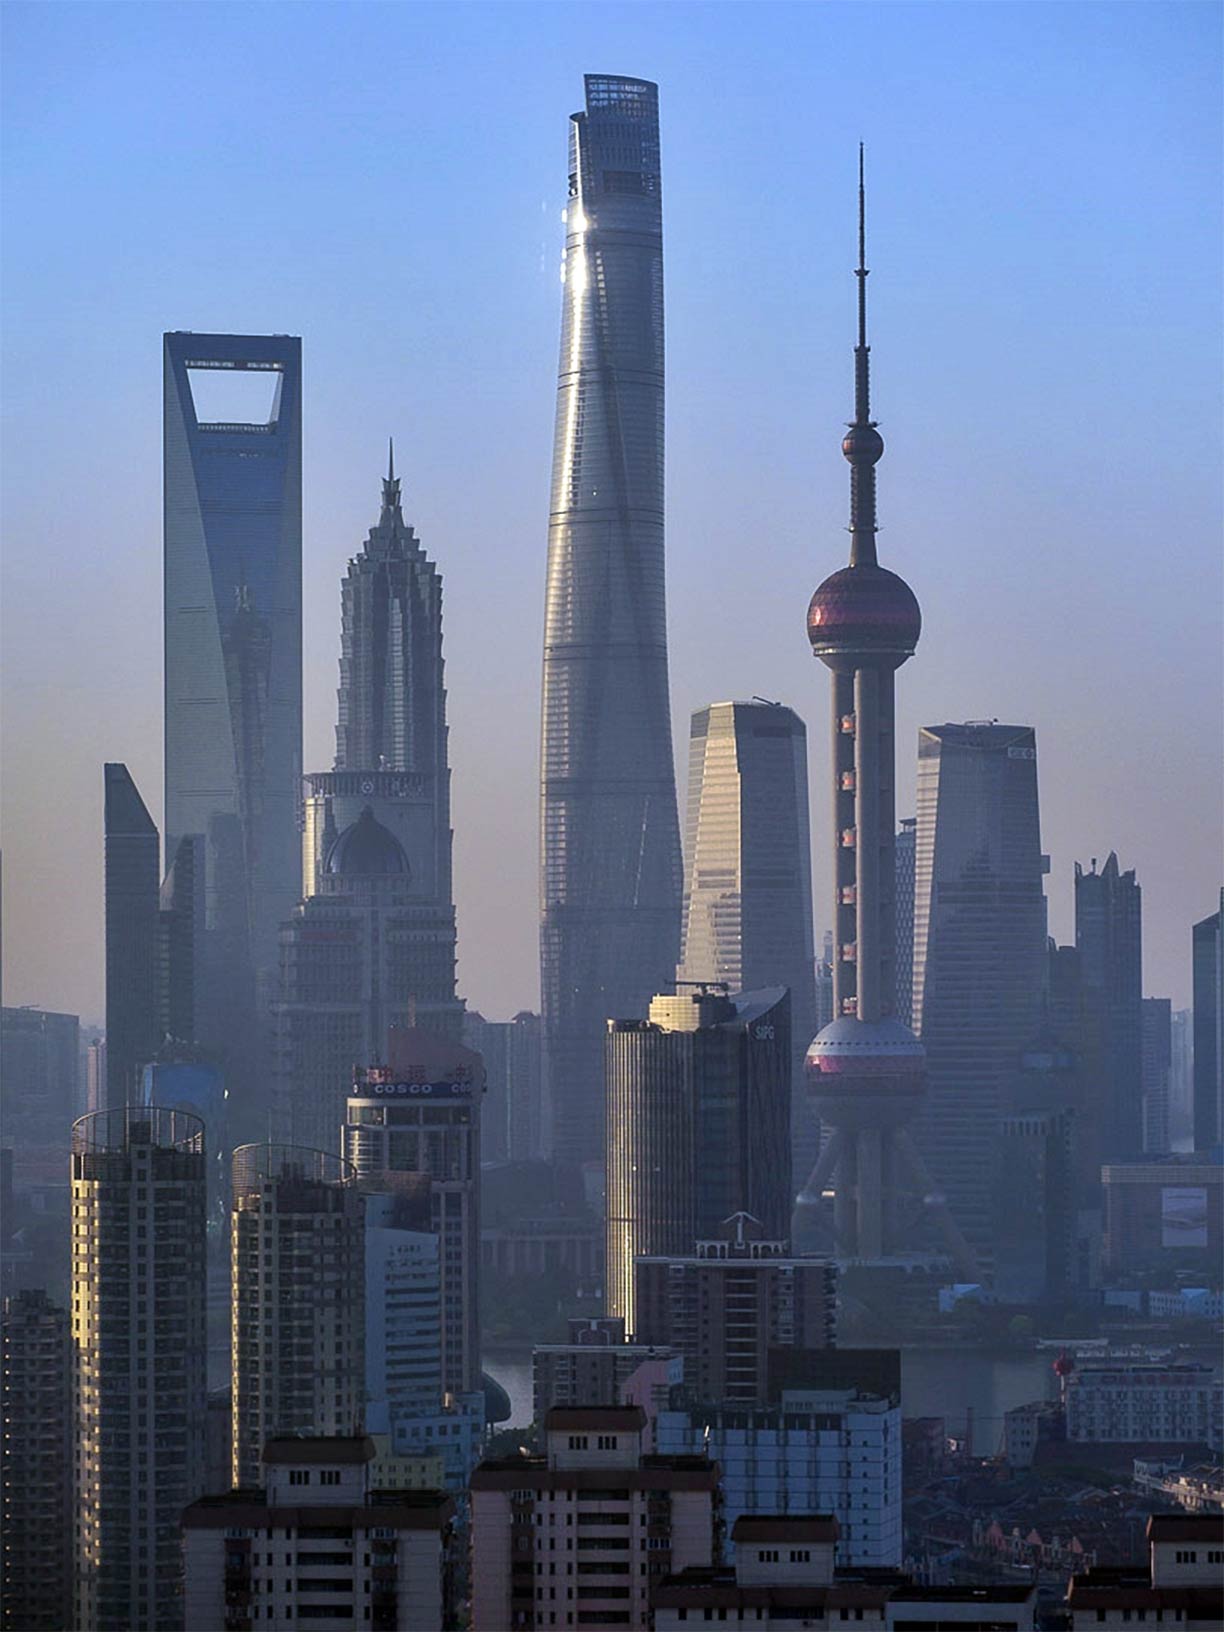 Lujiazui, Shanghai’s new financial district with Shanghai World Financial Center, Jin Mao Tower, Shanghai Tower (the world's second tallest building), and the Oriental Pearl TV Tower